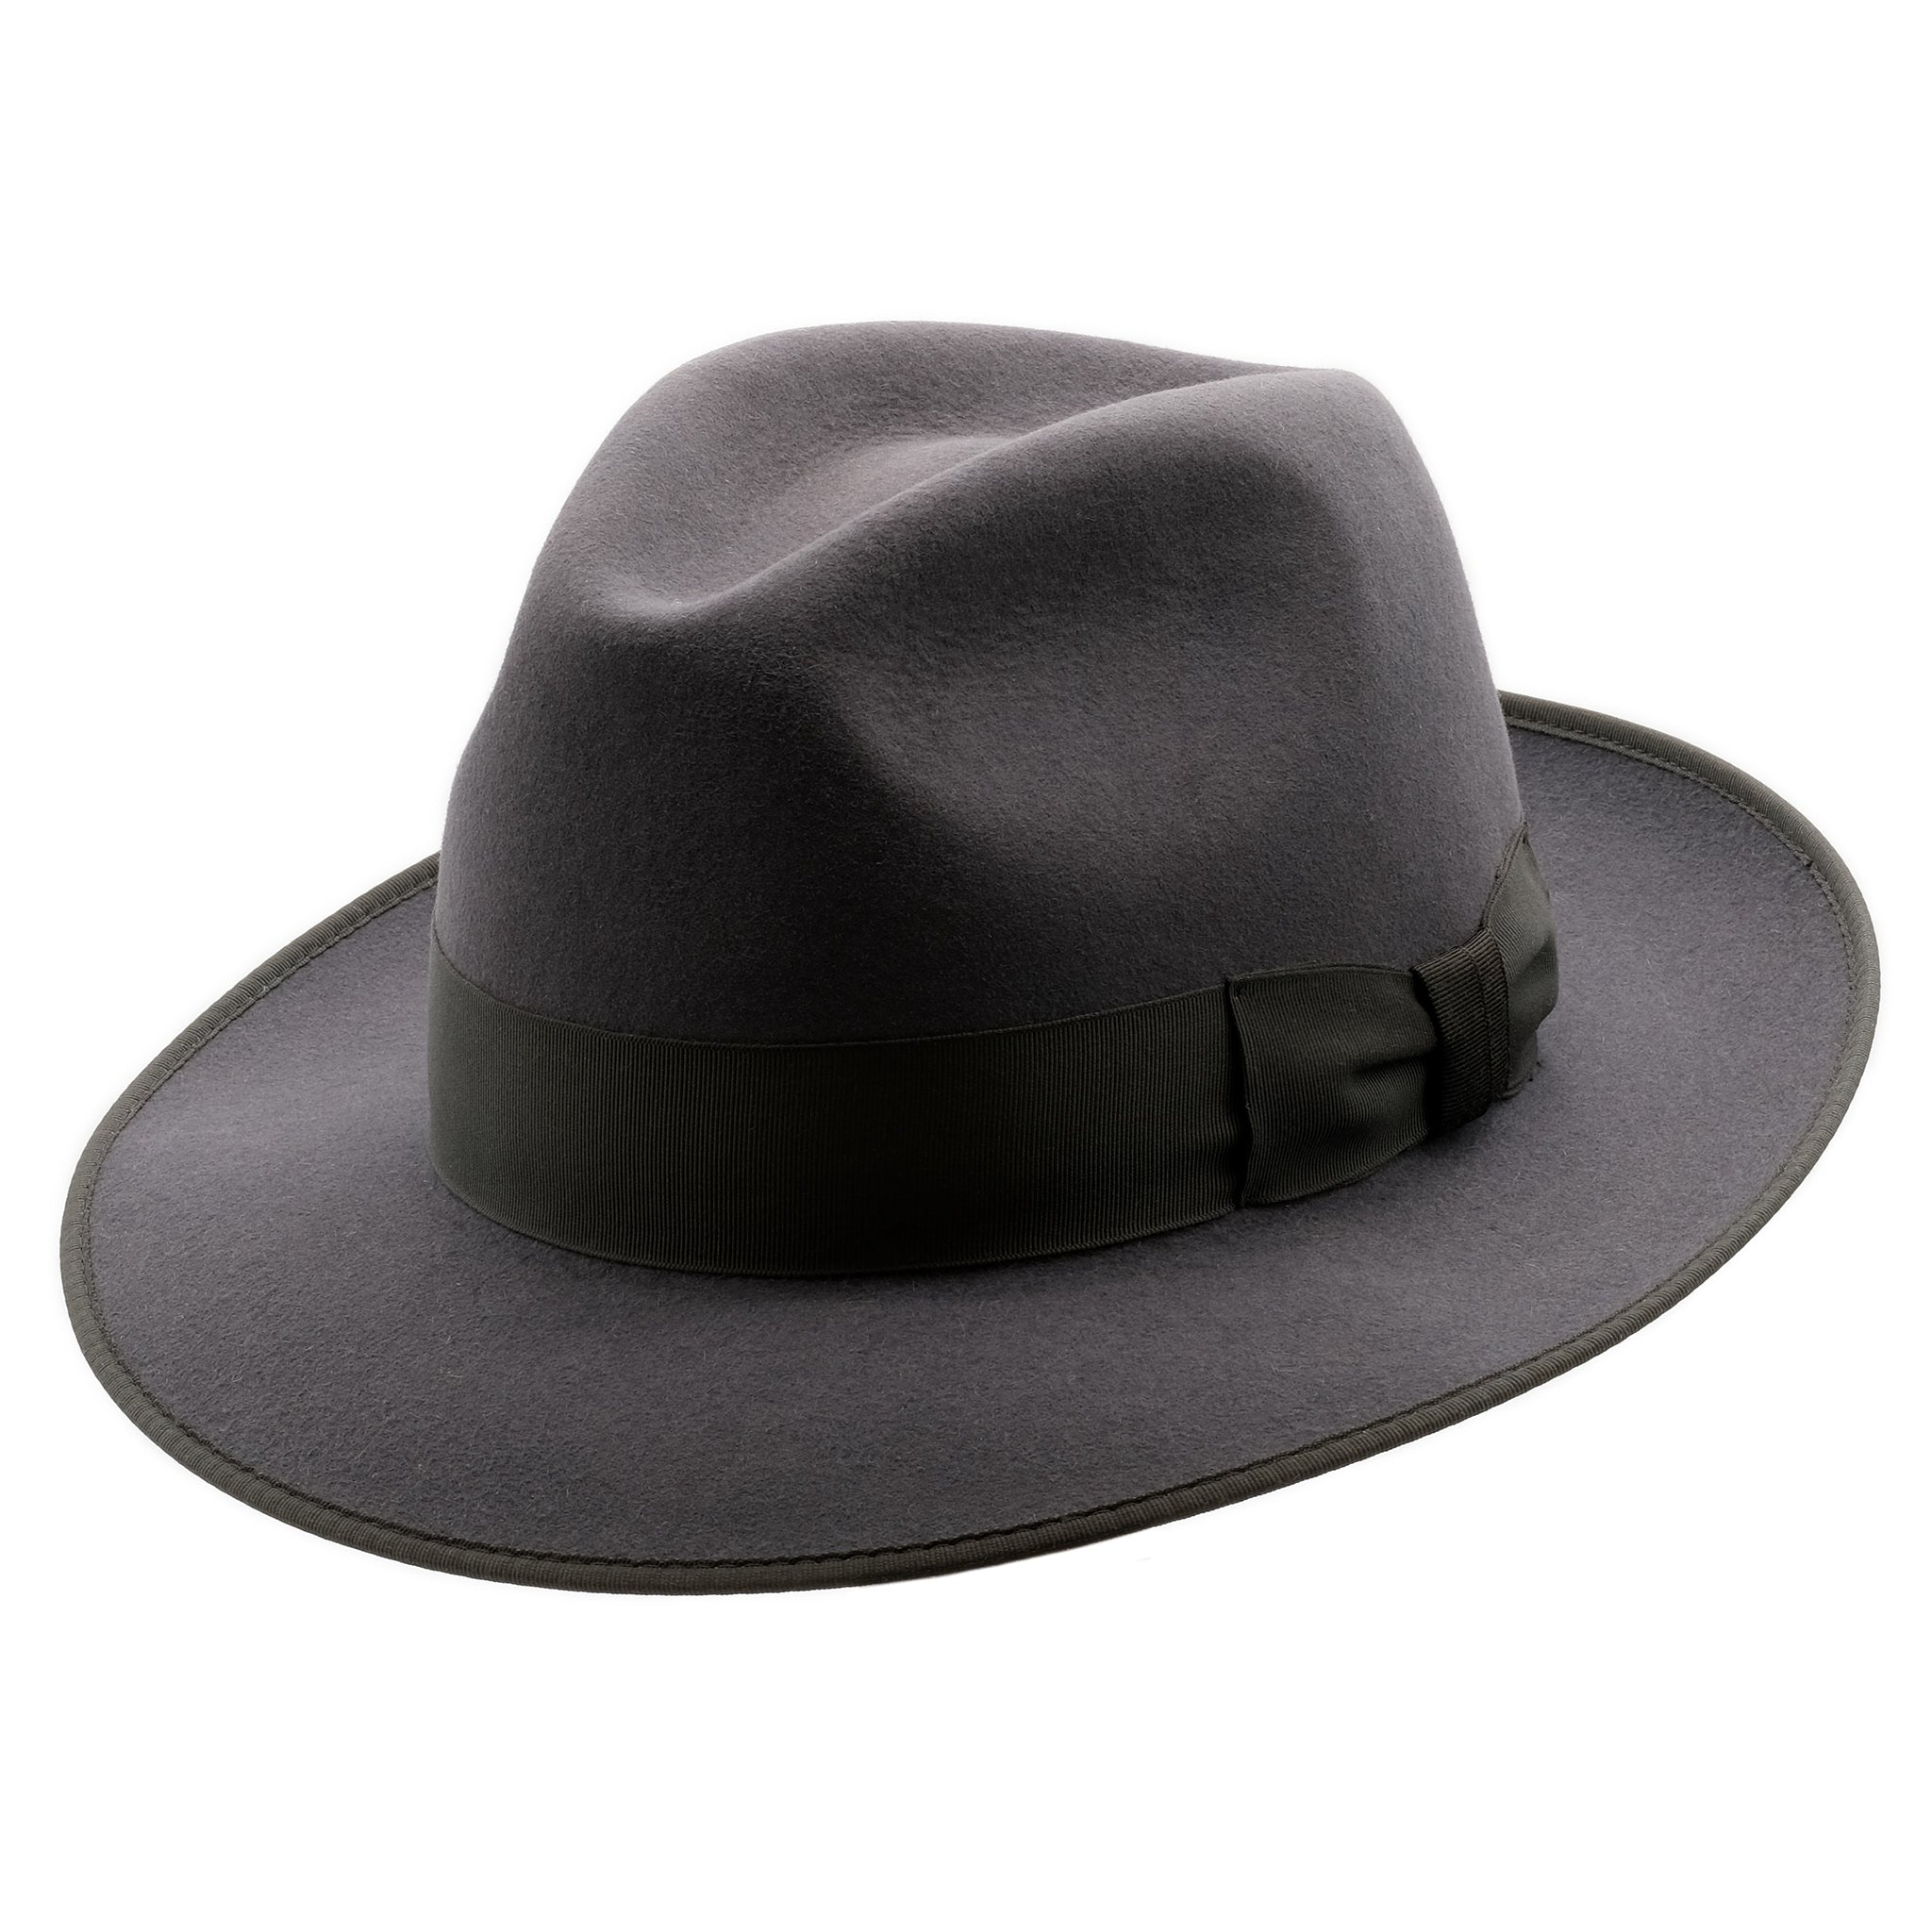 Angle view of Akubra Bogart hat in Carbon Grey